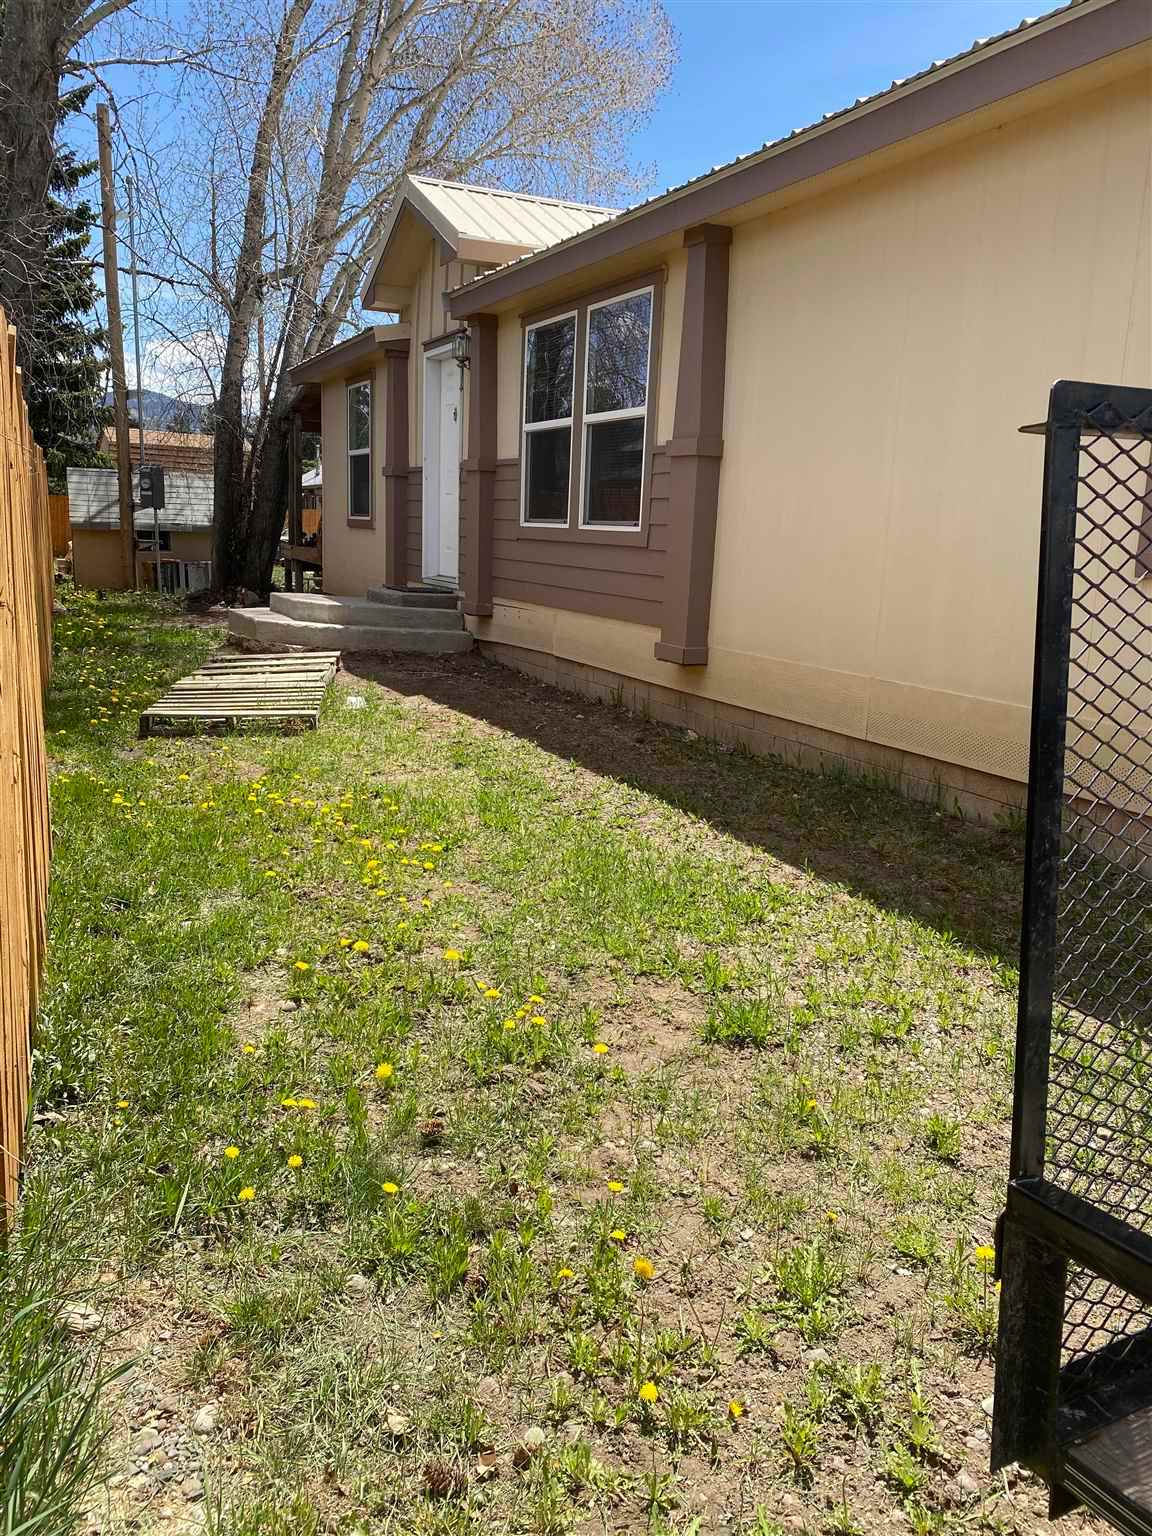 870 Pine, Chama, New Mexico 87520, 3 Bedrooms Bedrooms, ,2 BathroomsBathrooms,Residential,For Sale,870 Pine,202102224